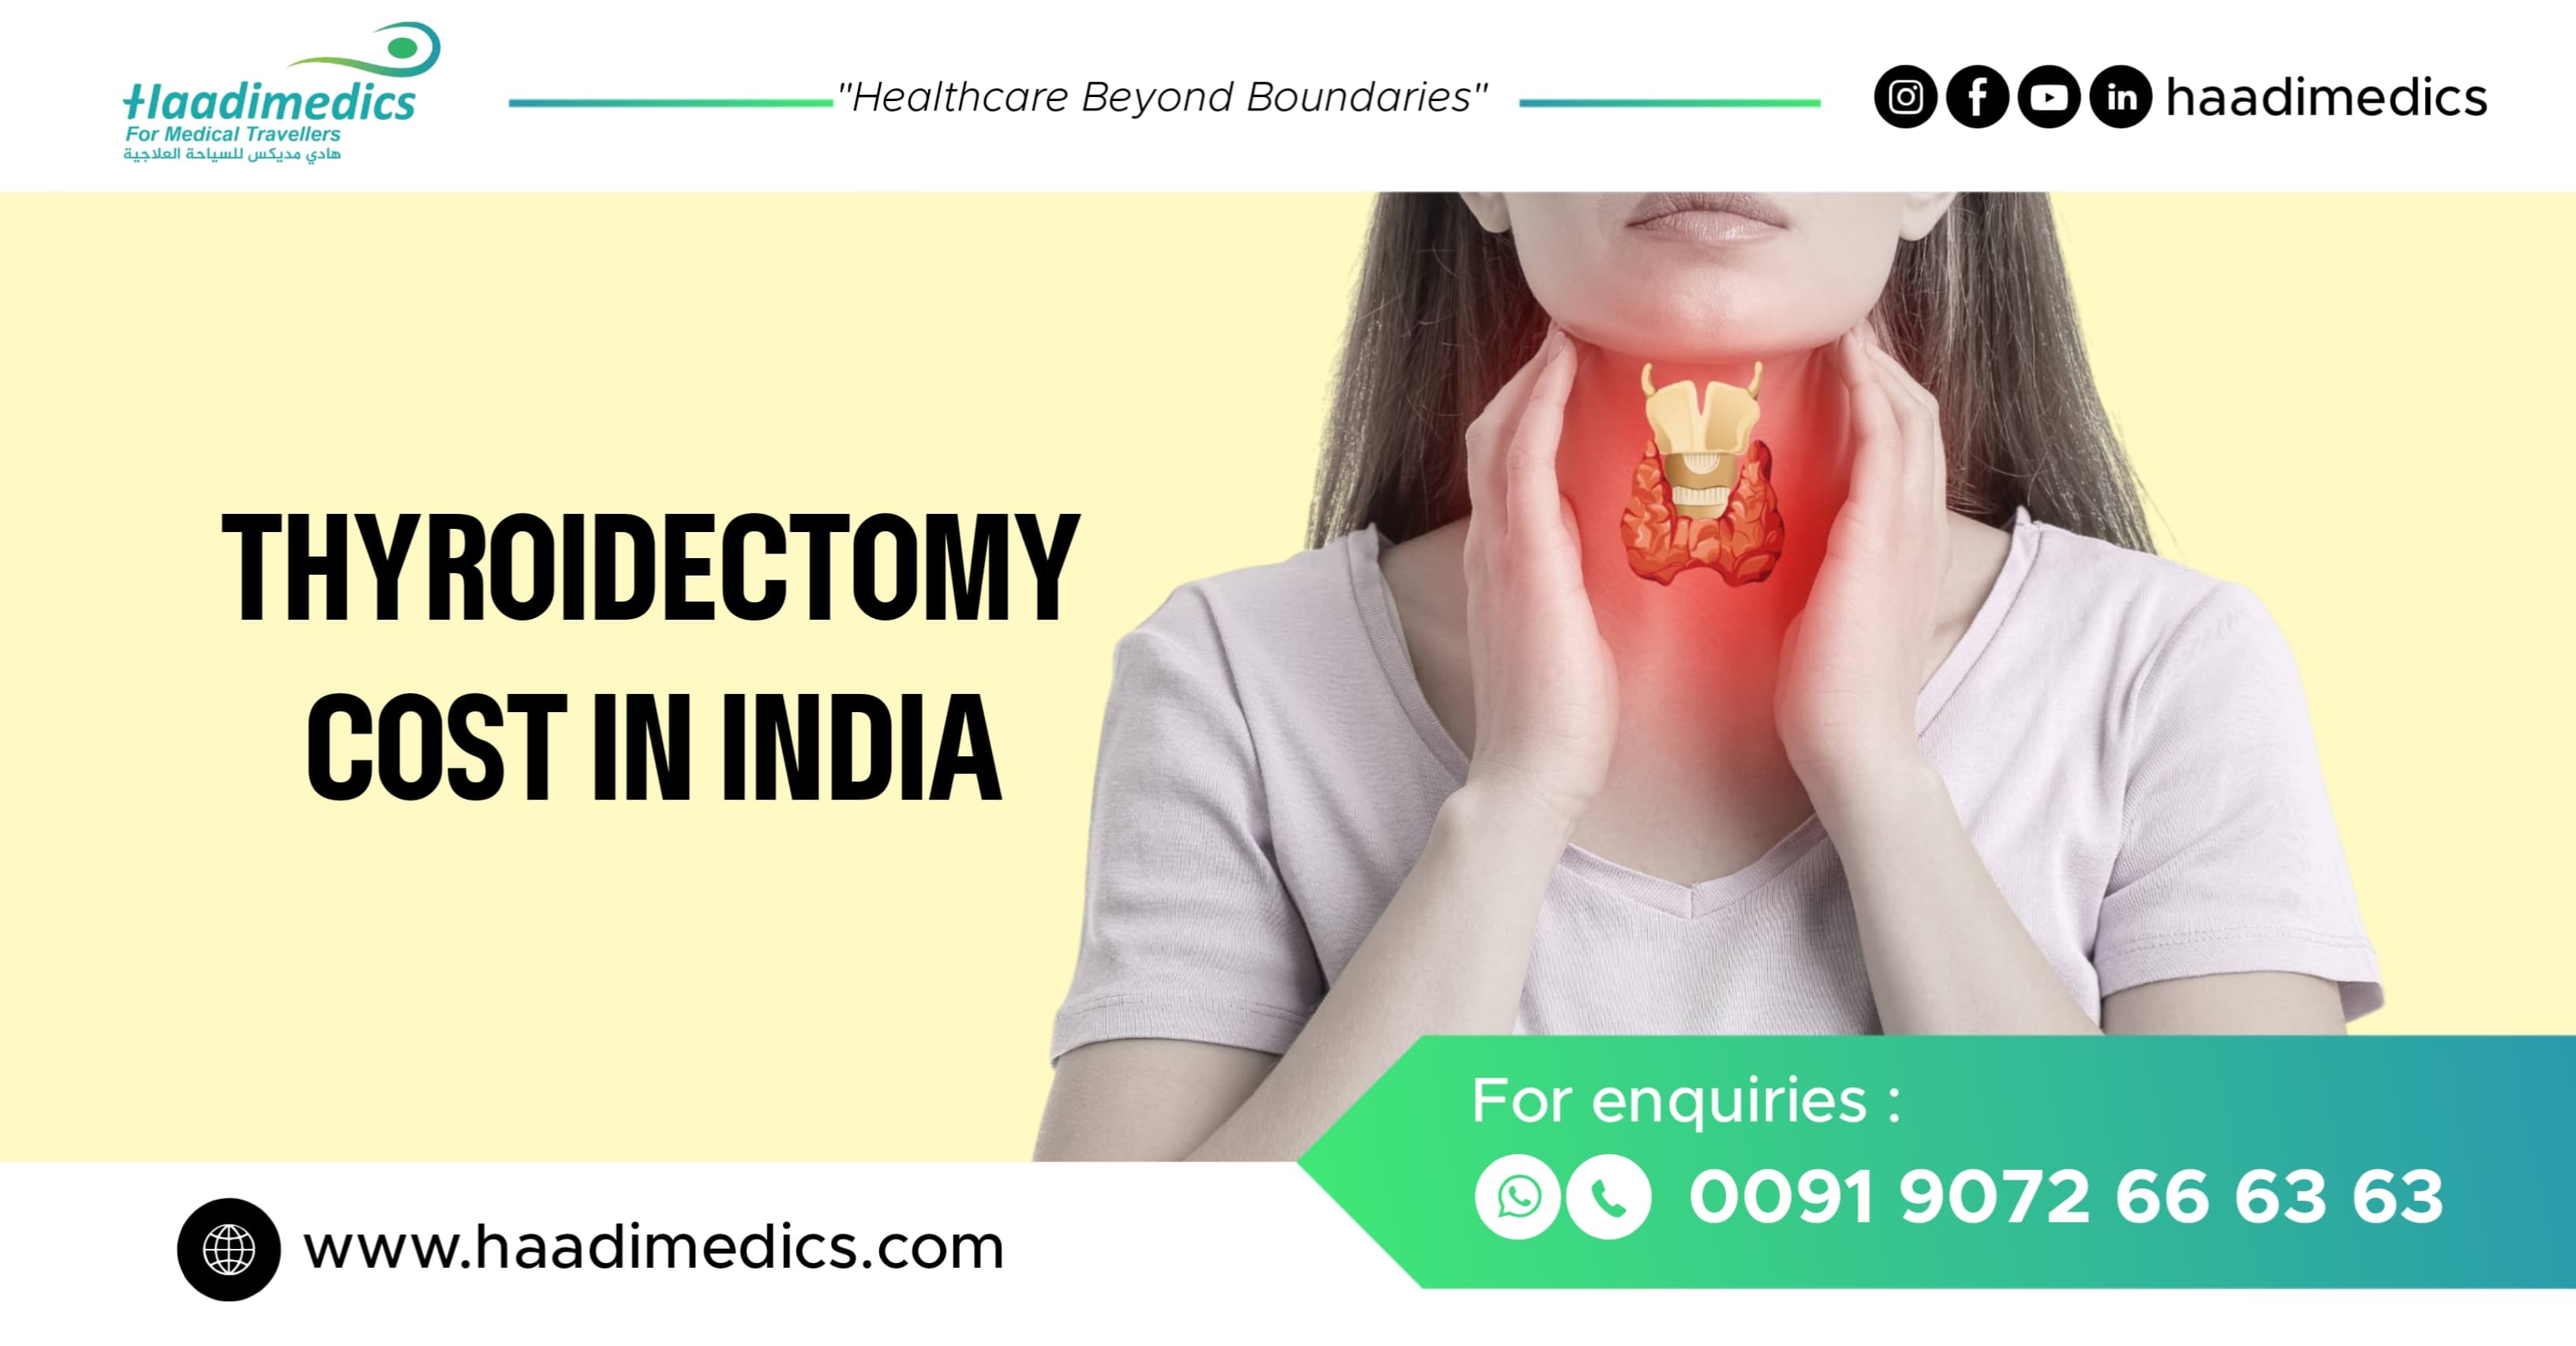 Thyroidectomy Cost in India